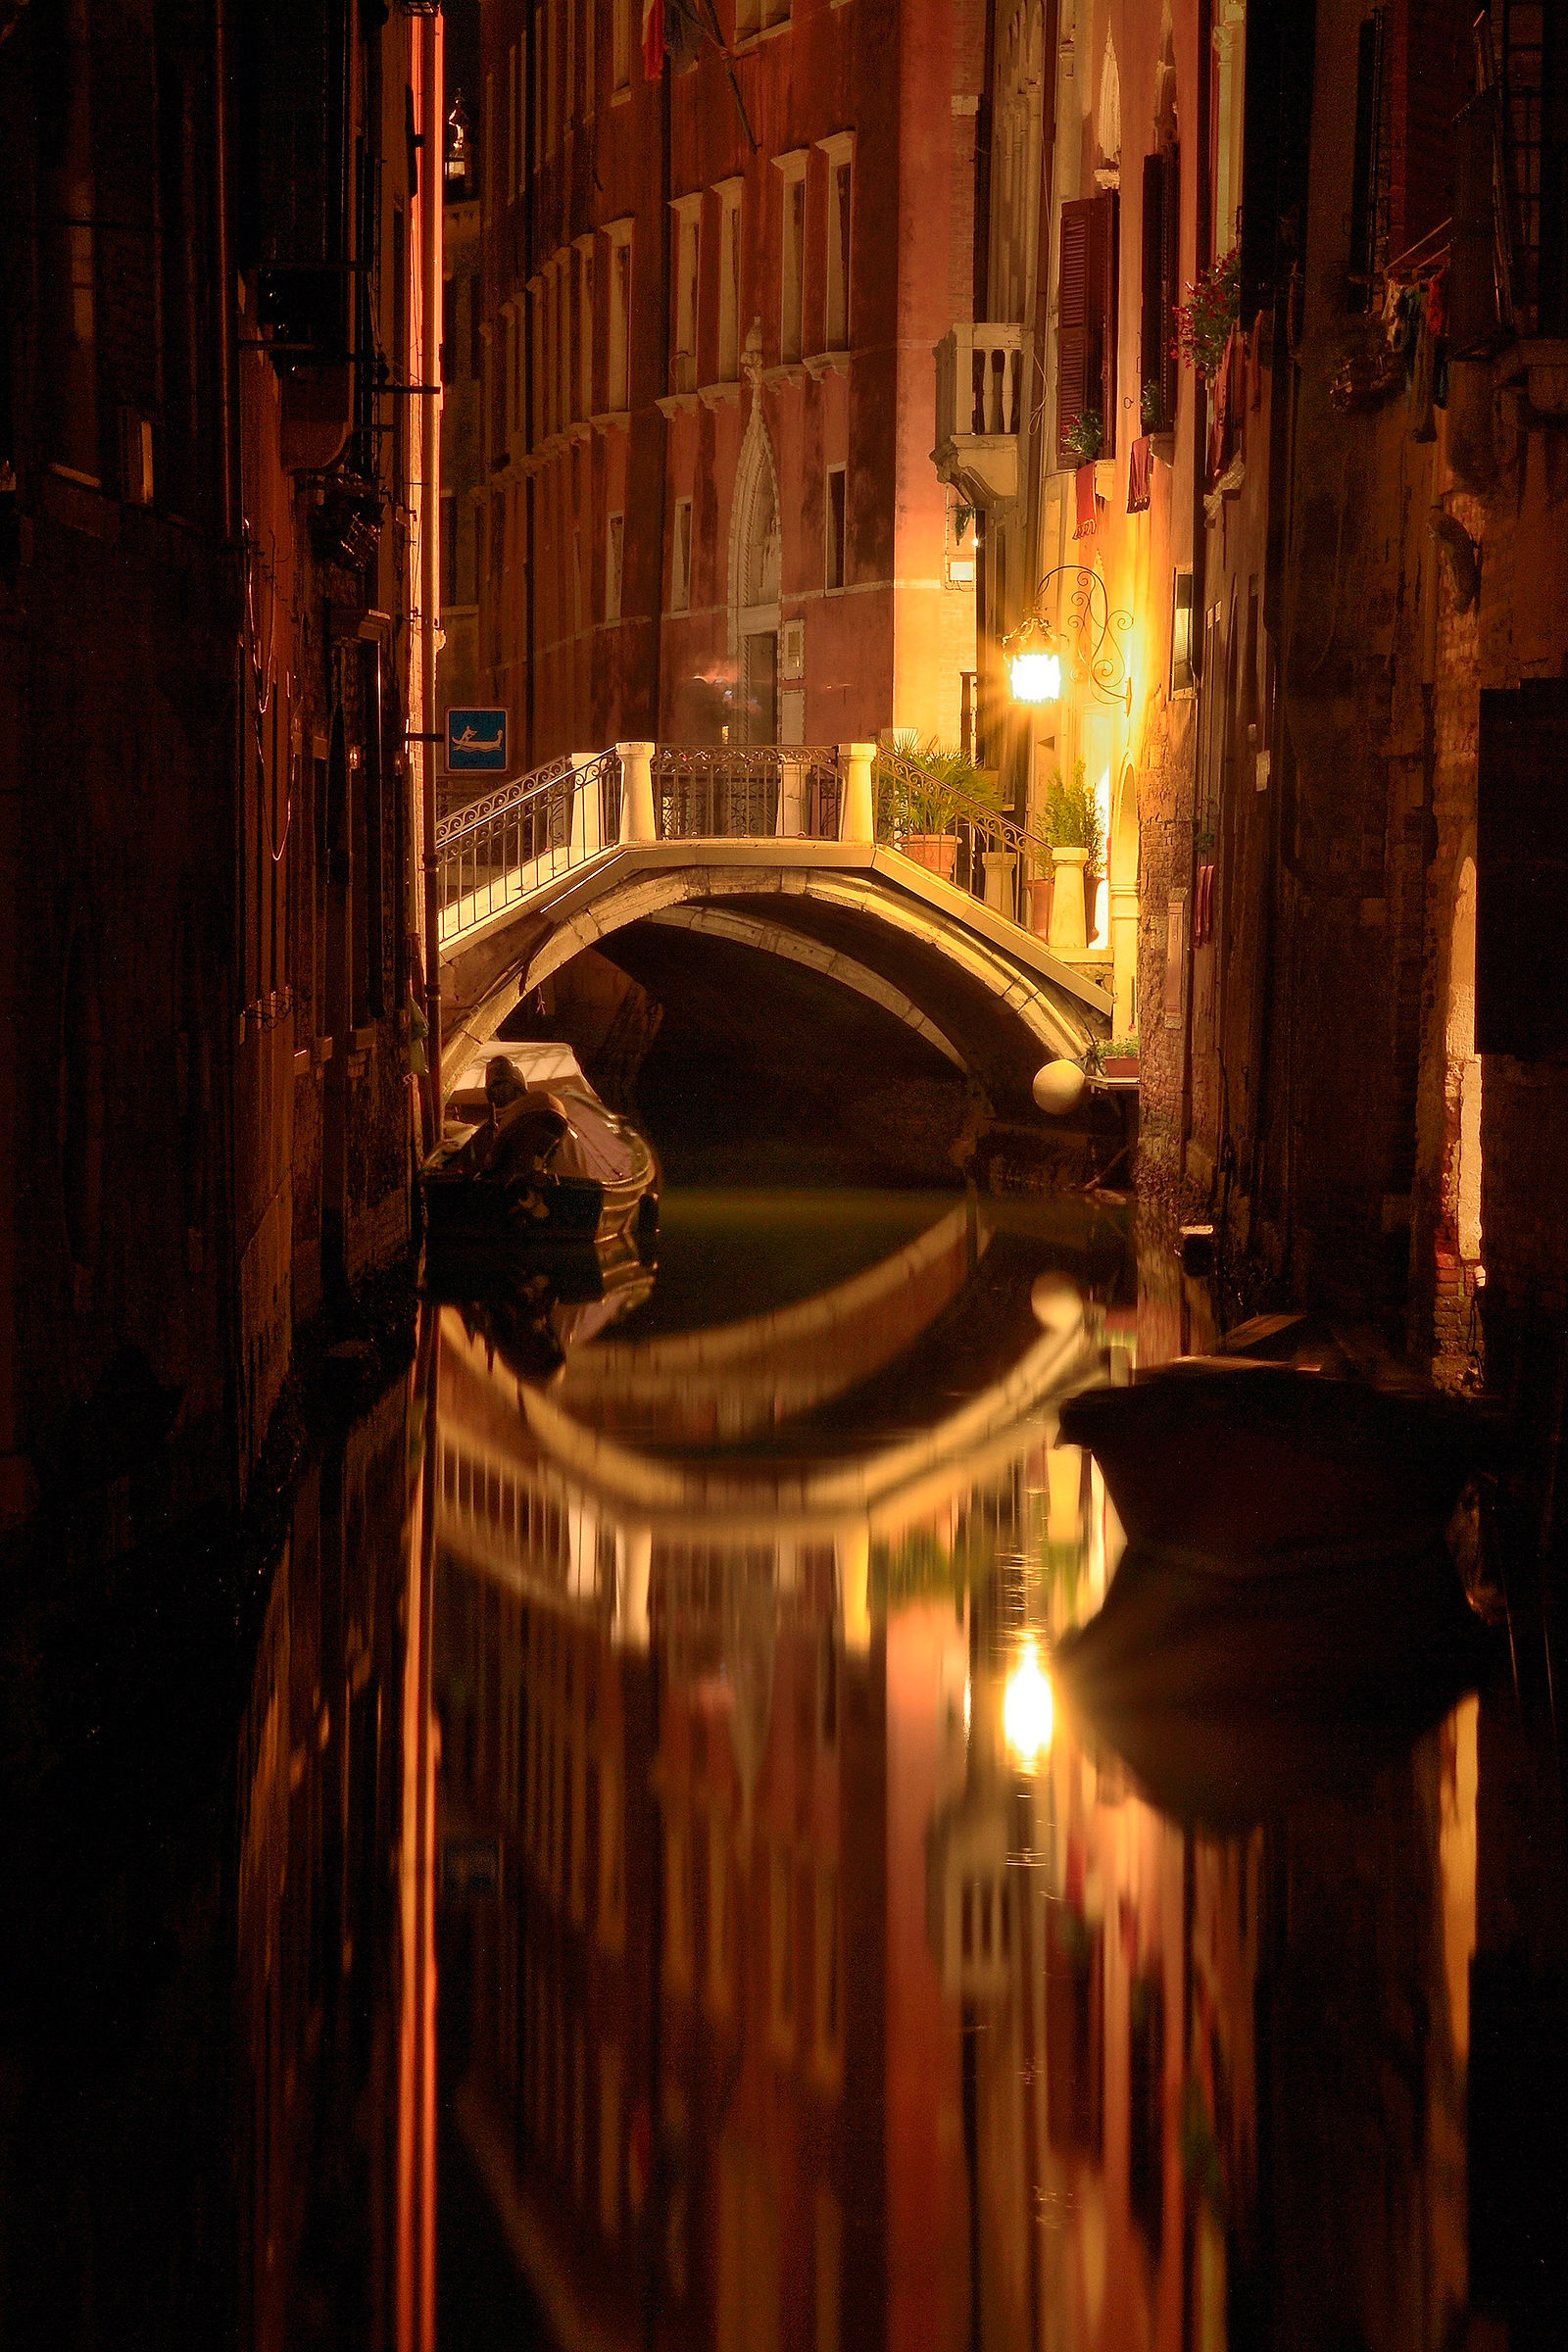 Venice and the magic of its channels...